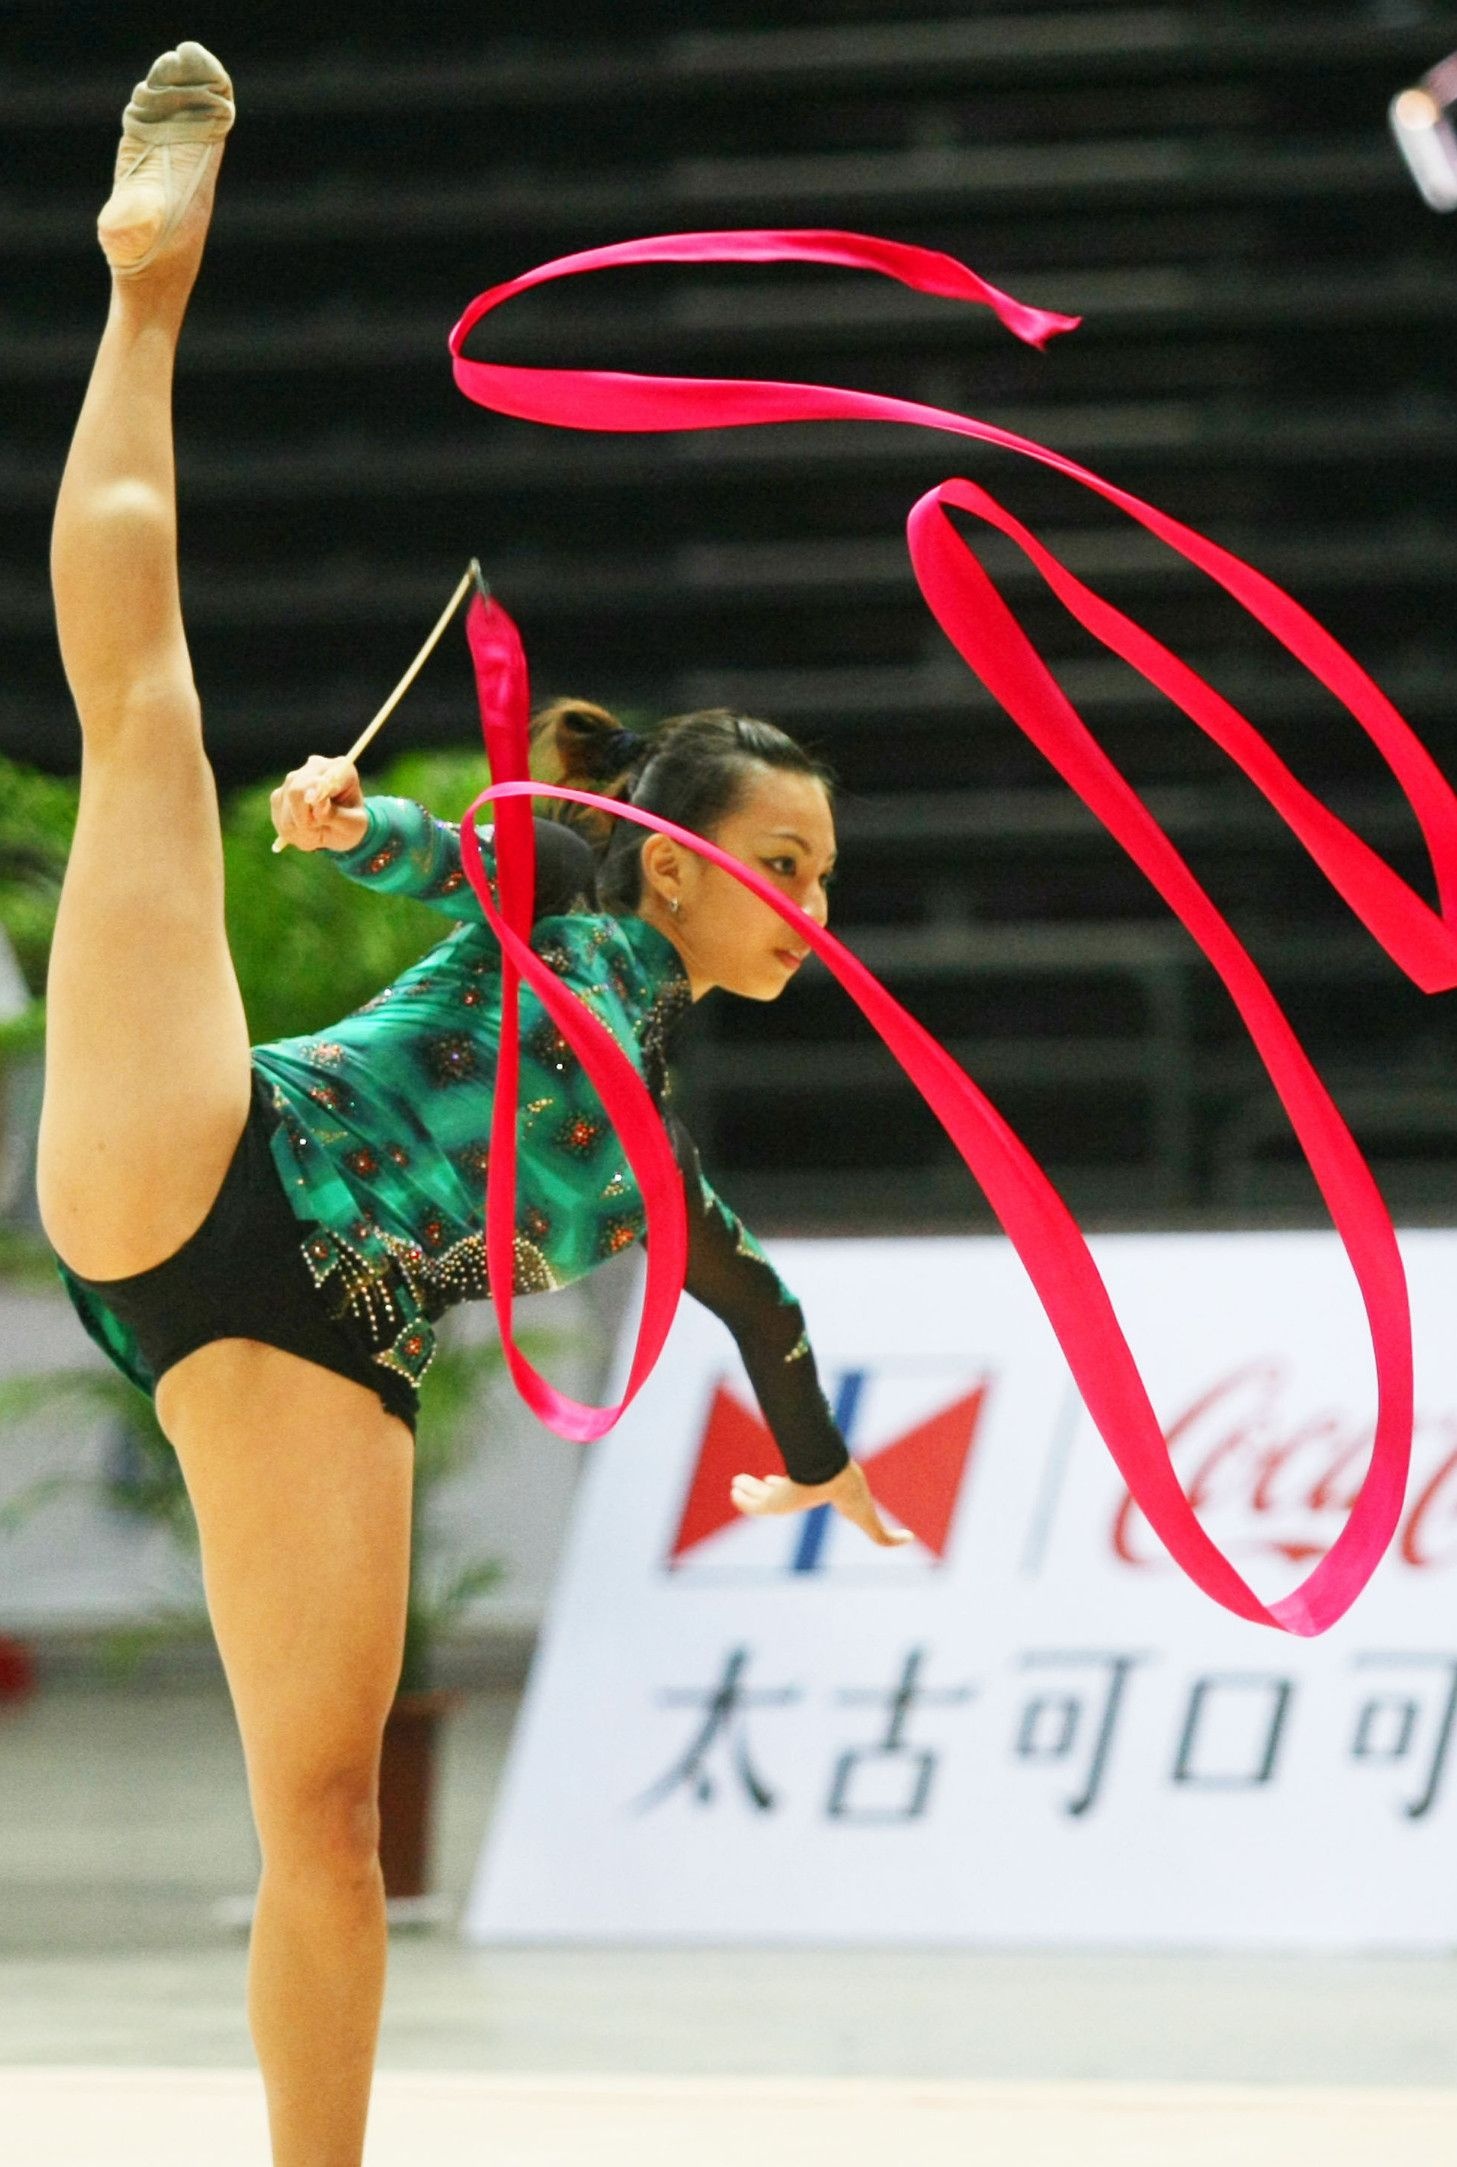 Rhythmic Gymnastics: A dance performance with a ribbon by a professional gymnast at the championship in China. 1460x2170 HD Wallpaper.